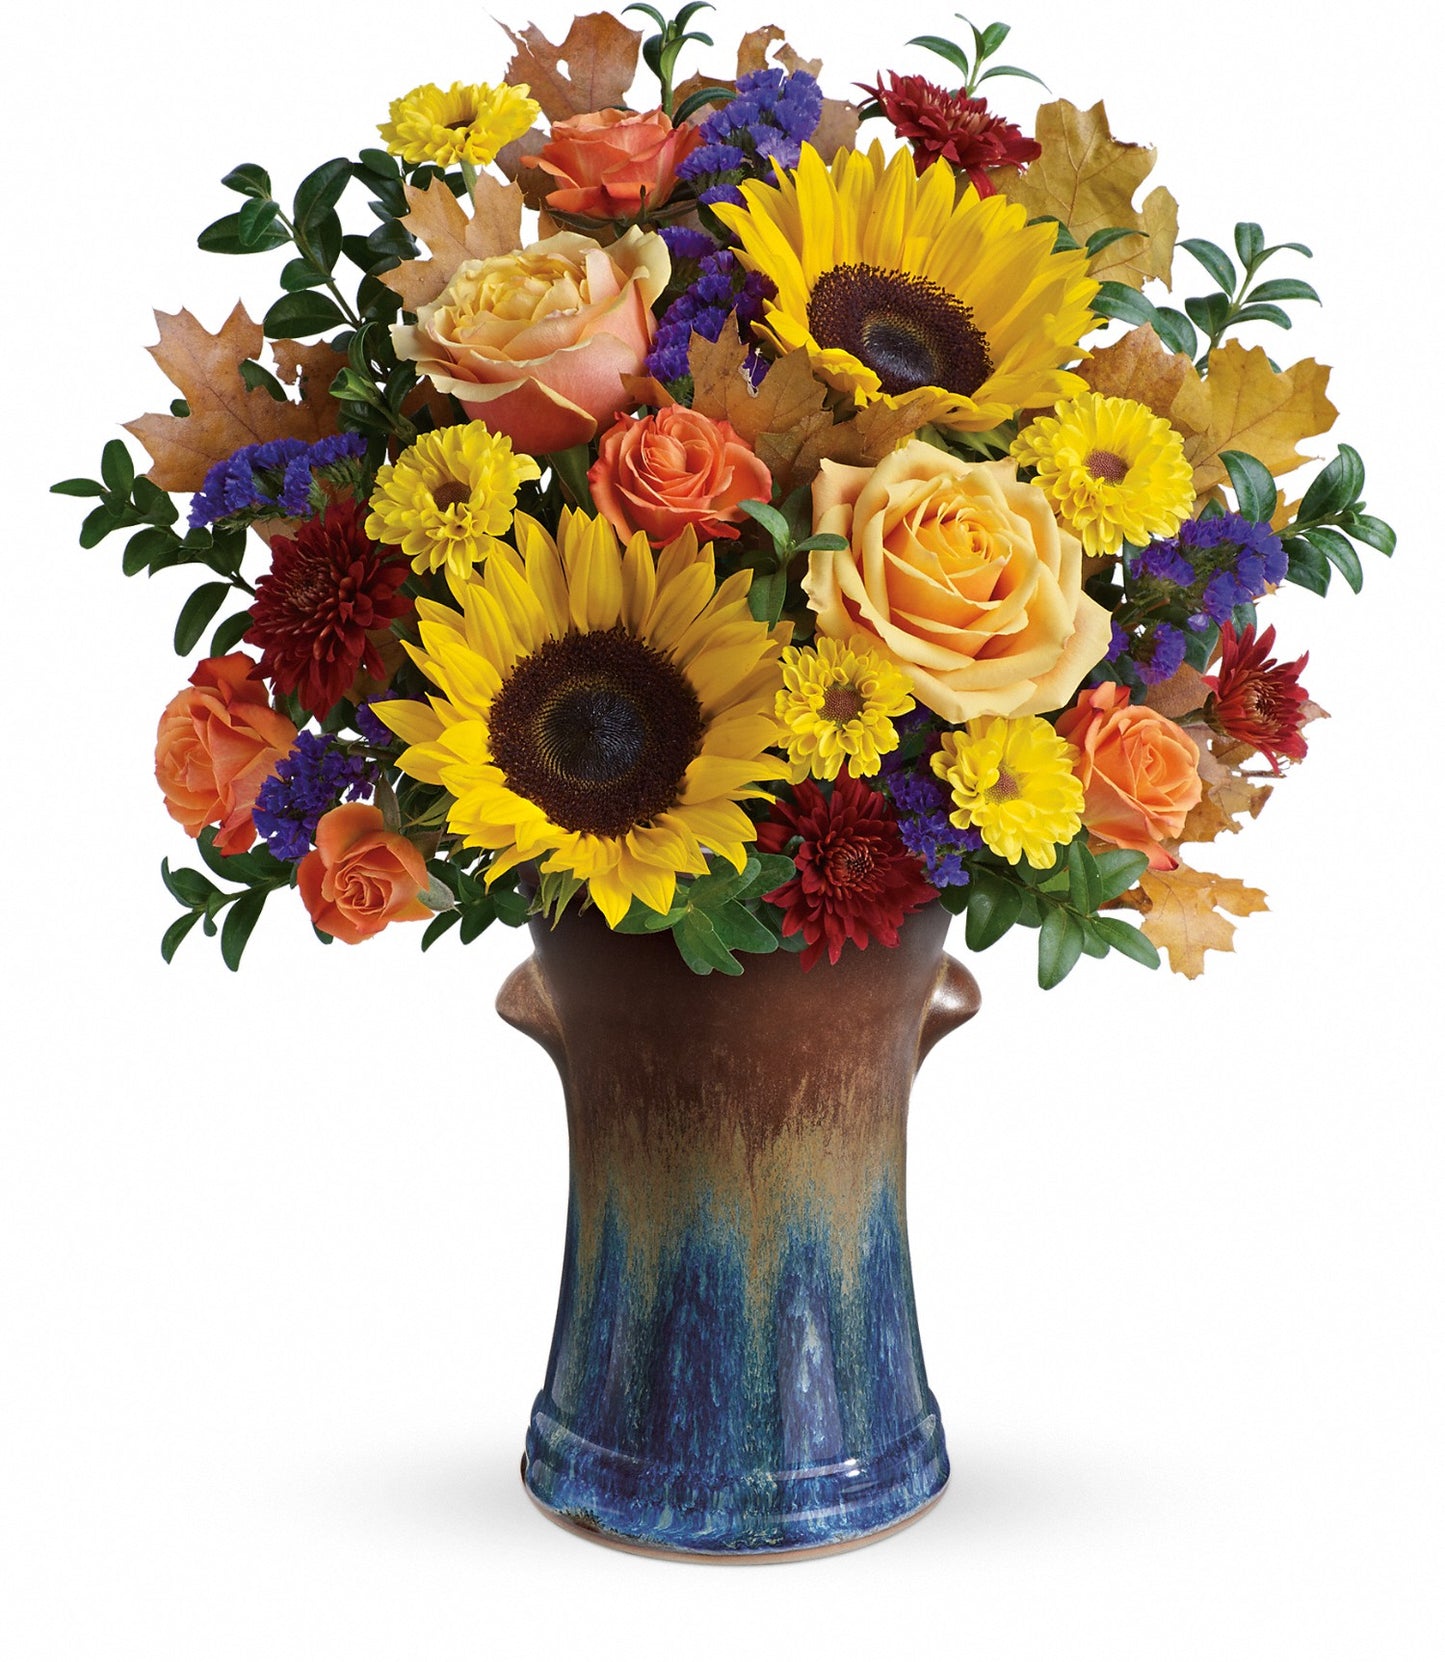 Country Sunflowers Bouquet